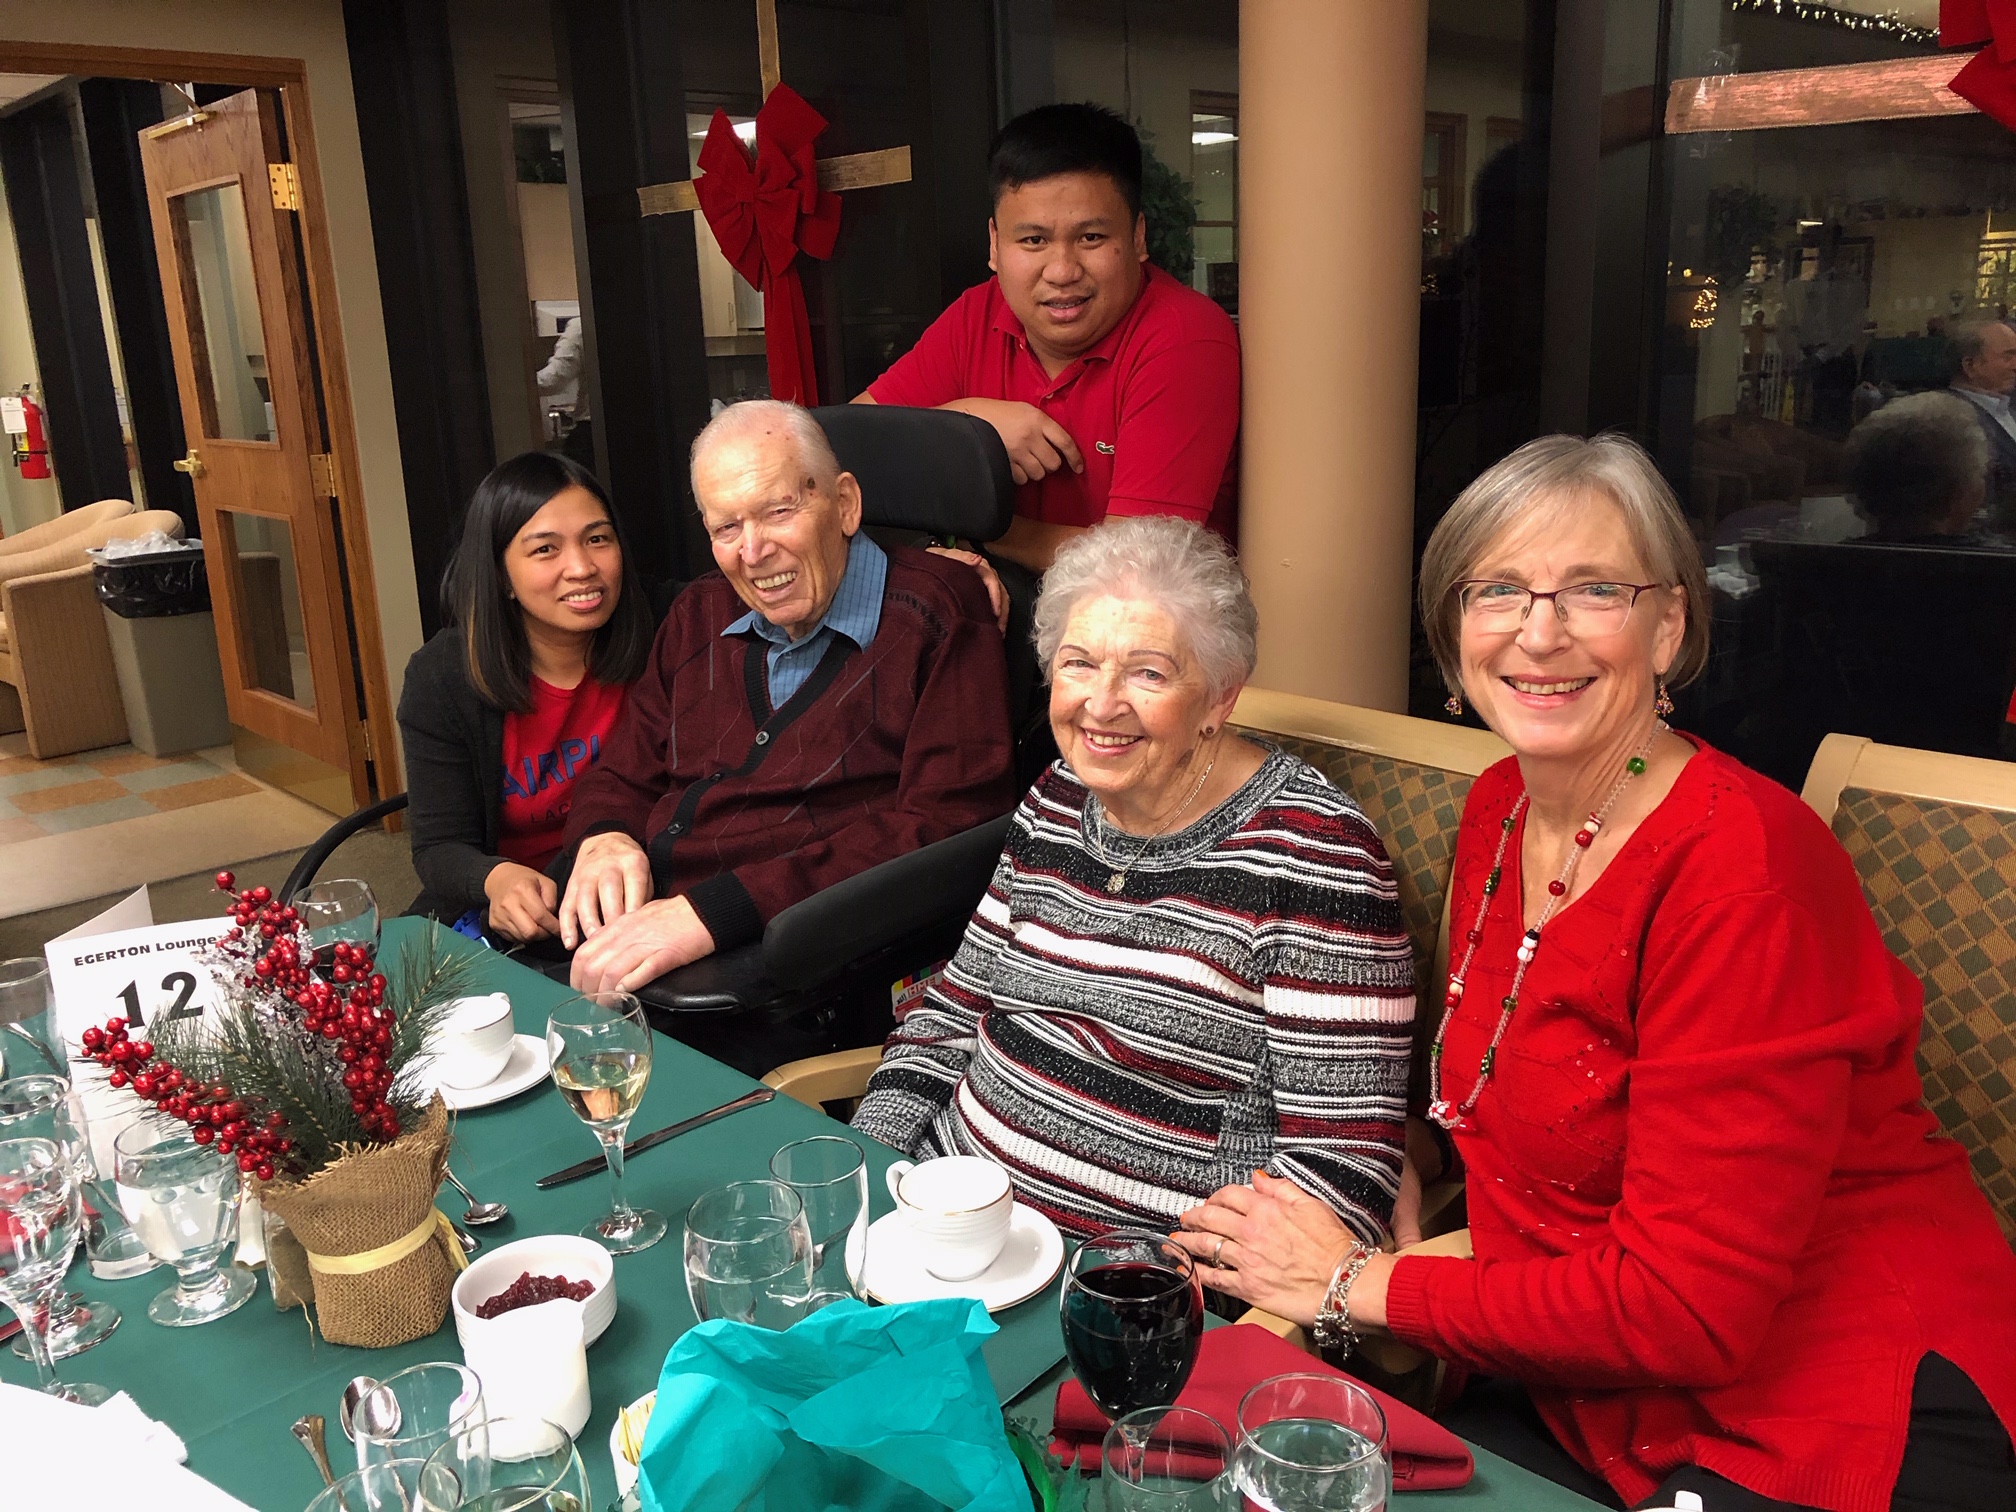 During the 2019 Christmas season, Don, Claudette and Patricia  spent time with caregivers Joy and Patrick in the Egerton Neighbourhood.